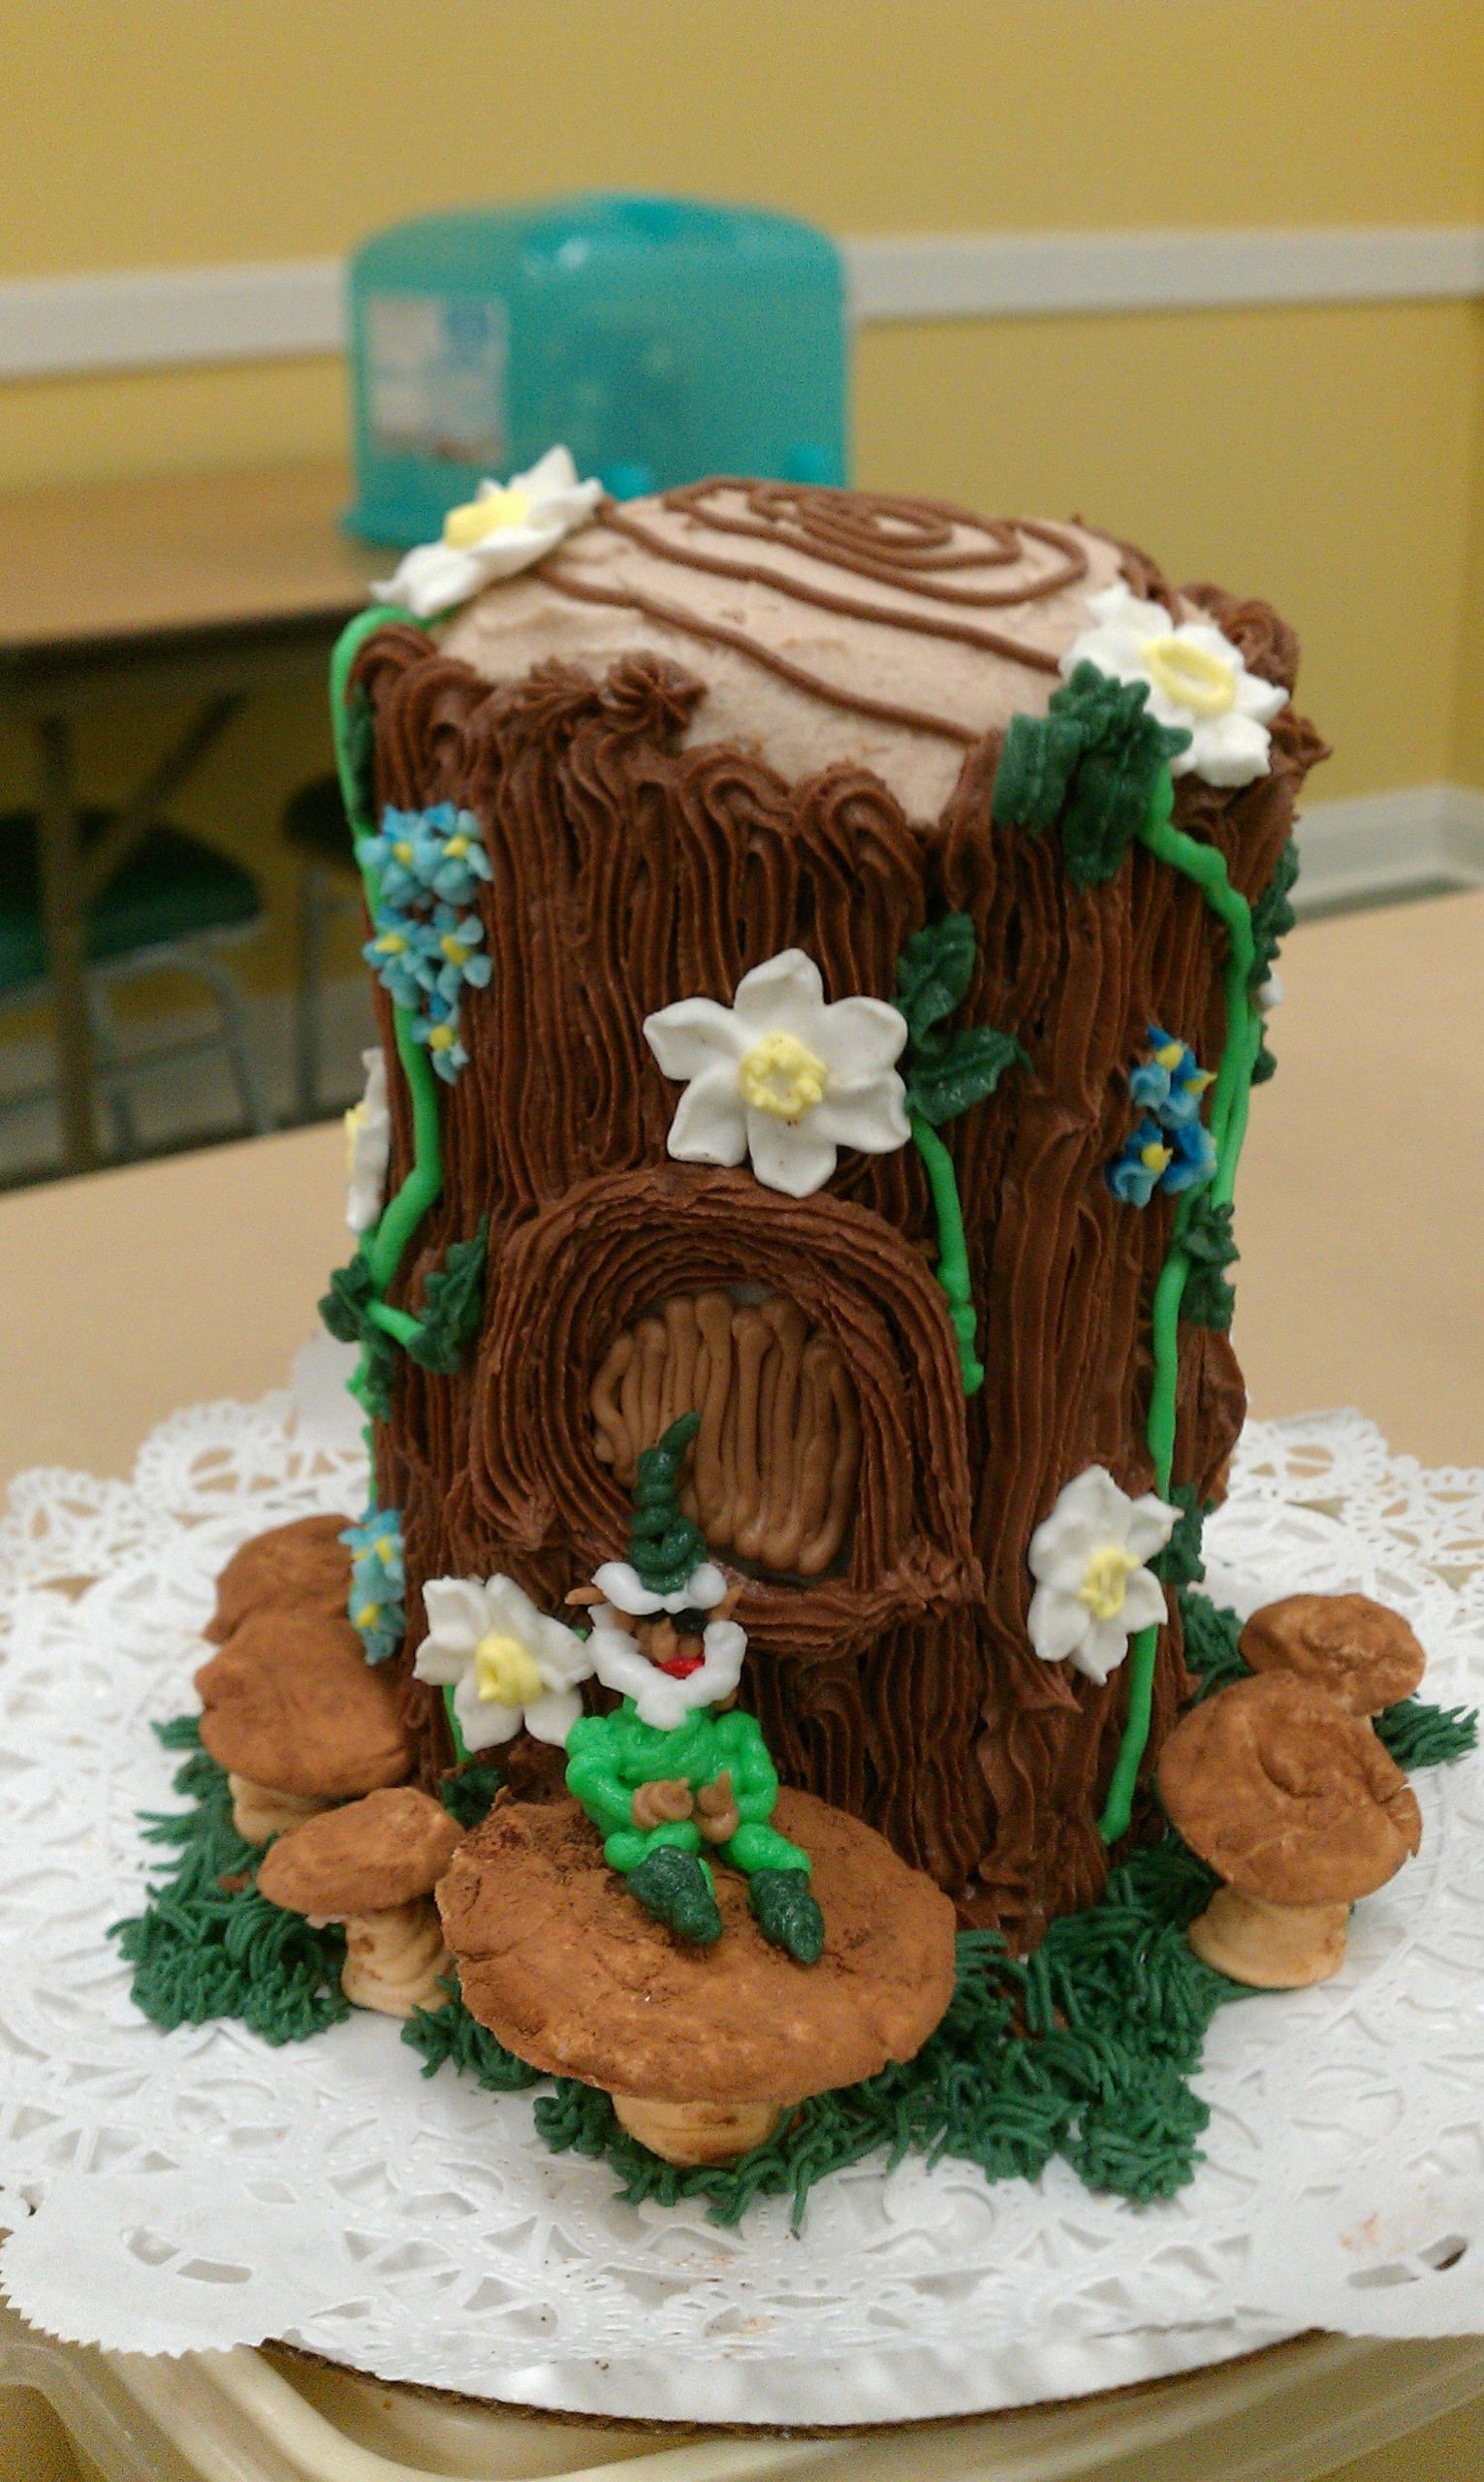 St Patrick's Day Cake Ideas
 St Patrick s day log cake with flowers and leprechauns